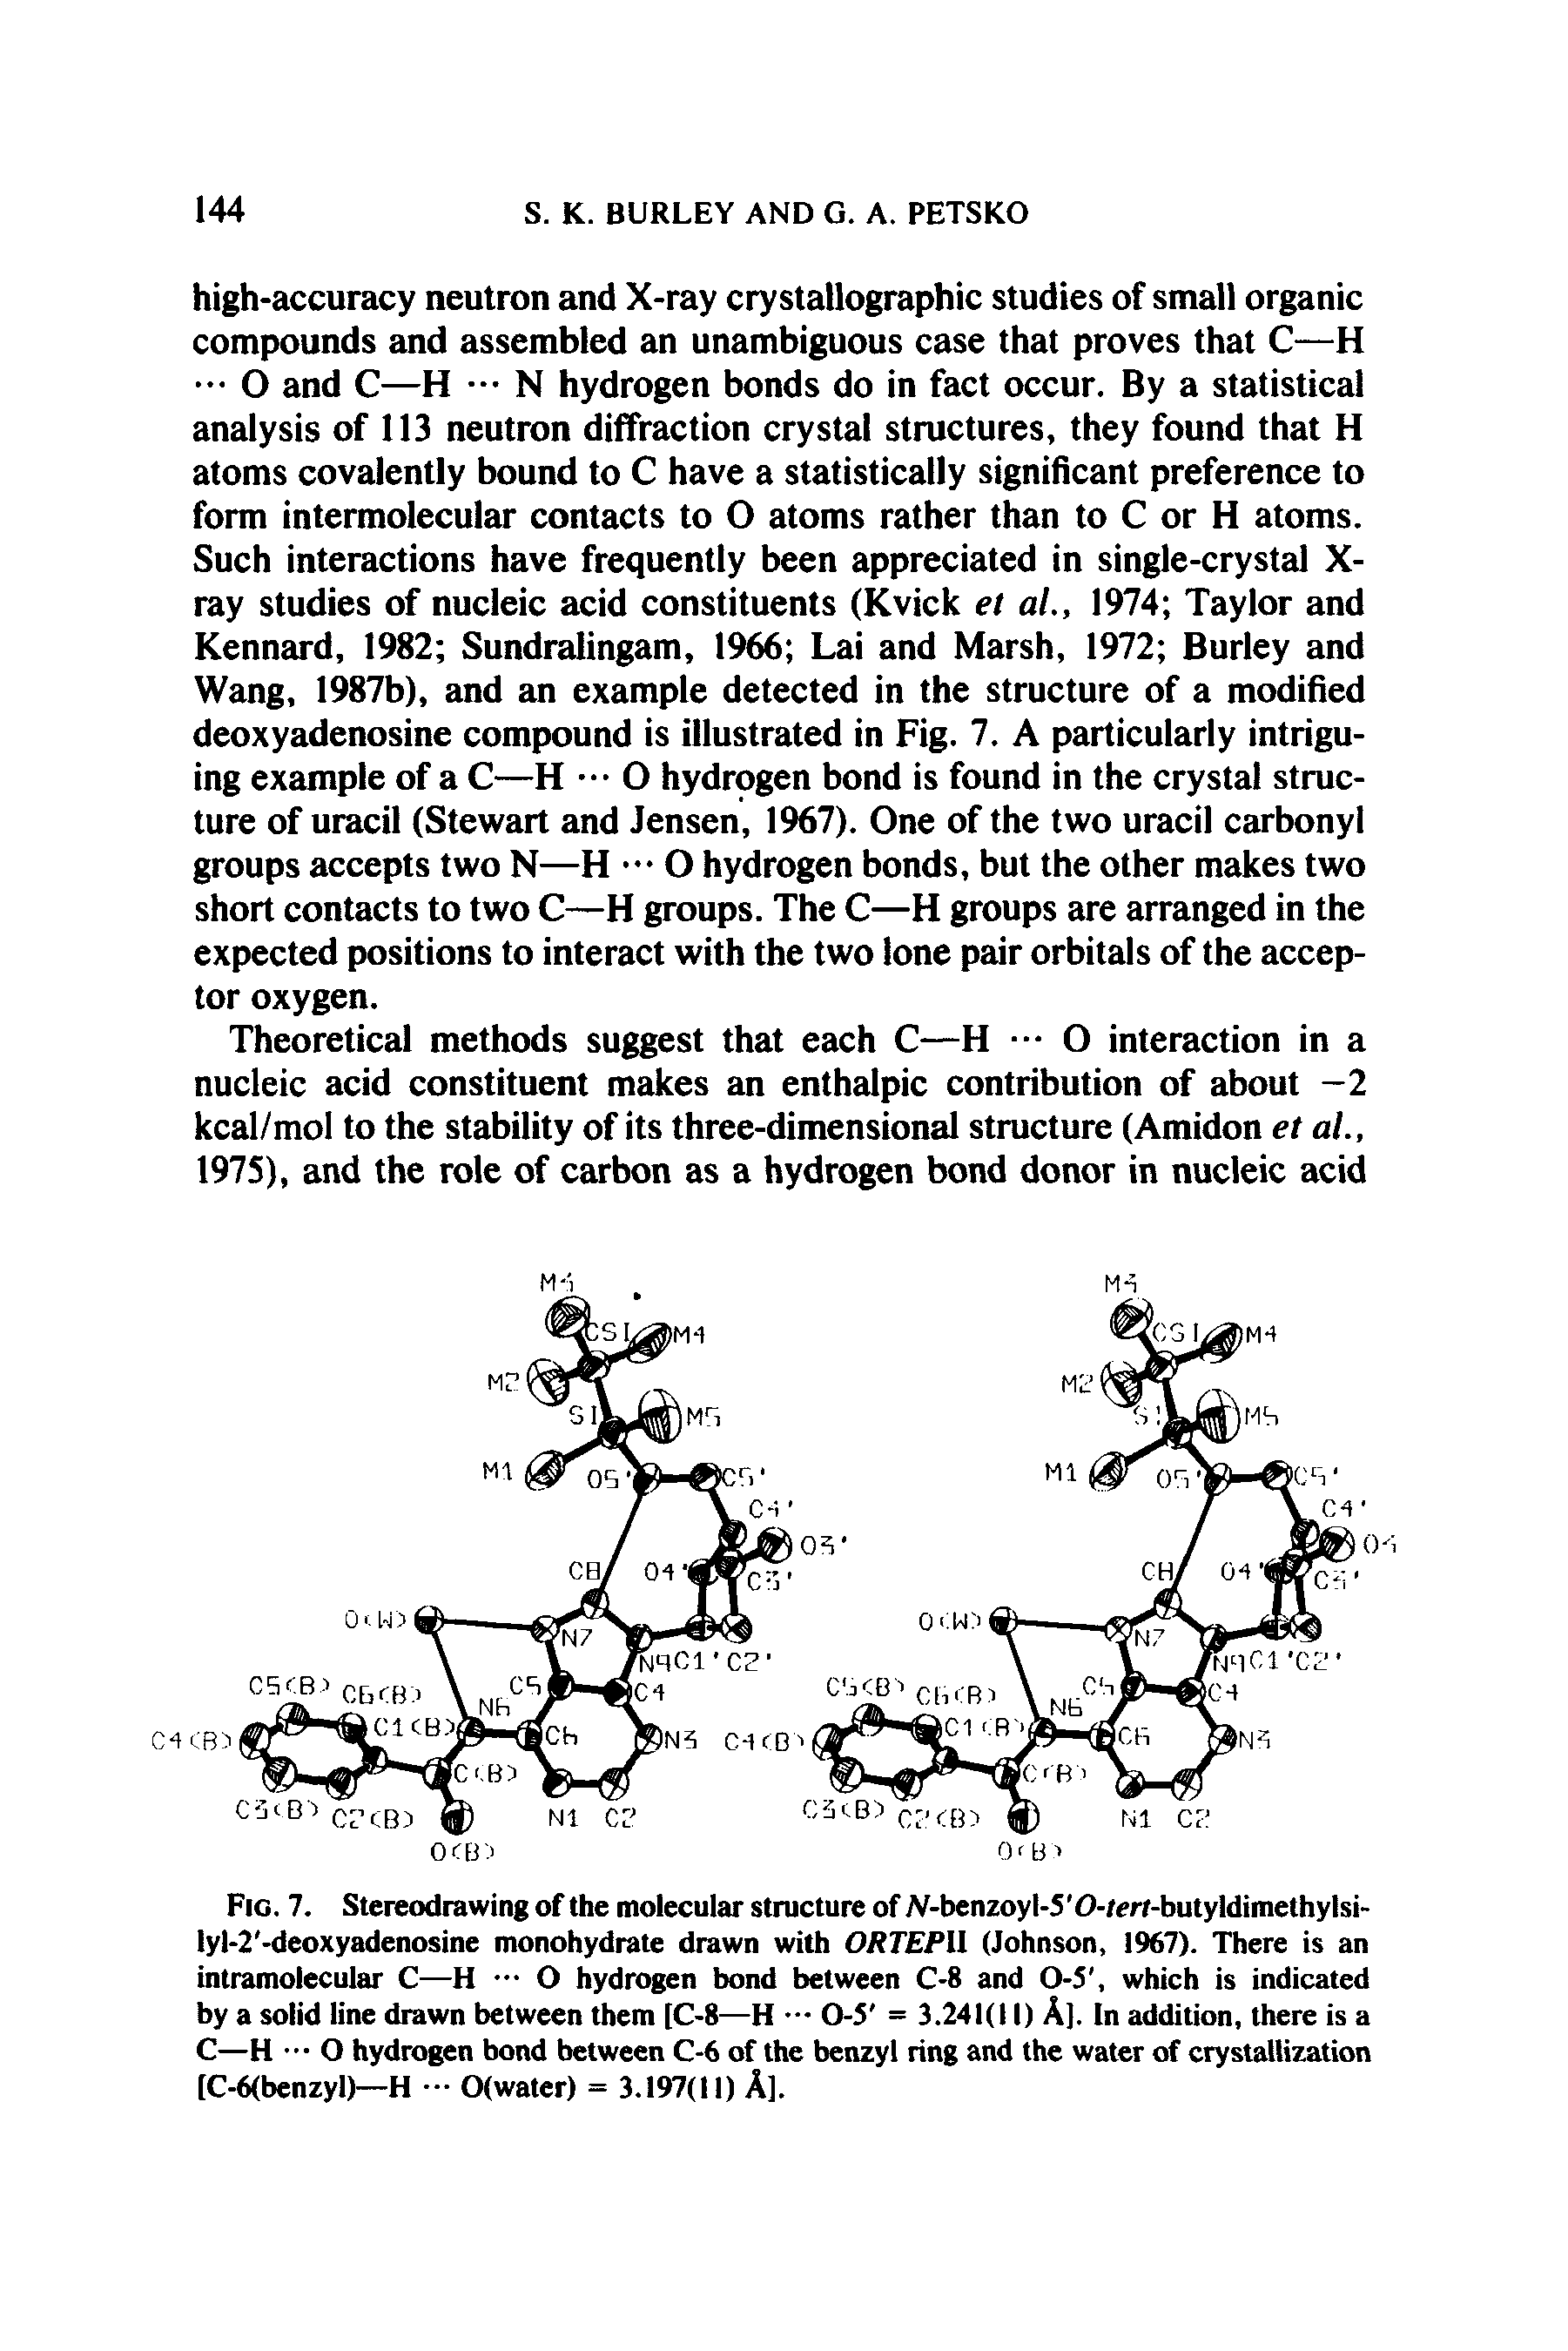 Fig. 7. Stereodrawing of the molecular structure of JV-benzoyl-5 0-/ert-butyldimethylsi-lyl-2 -deoxyadenosine monohydrate drawn with ORTEPU. (Johnson, 1967). There is an intramolecular C—H O hydrogen bond between C-8 and 0-5, which is indicated by a solid line drawn between them [C-8—H 0-5 = 3.241(11) A]. In addition, there is a C—H O hydrogen bond between C-6 of the benzyl ring and the water of crystallization [C-6(benzyl)—H O(water) = 3.197(11) A].